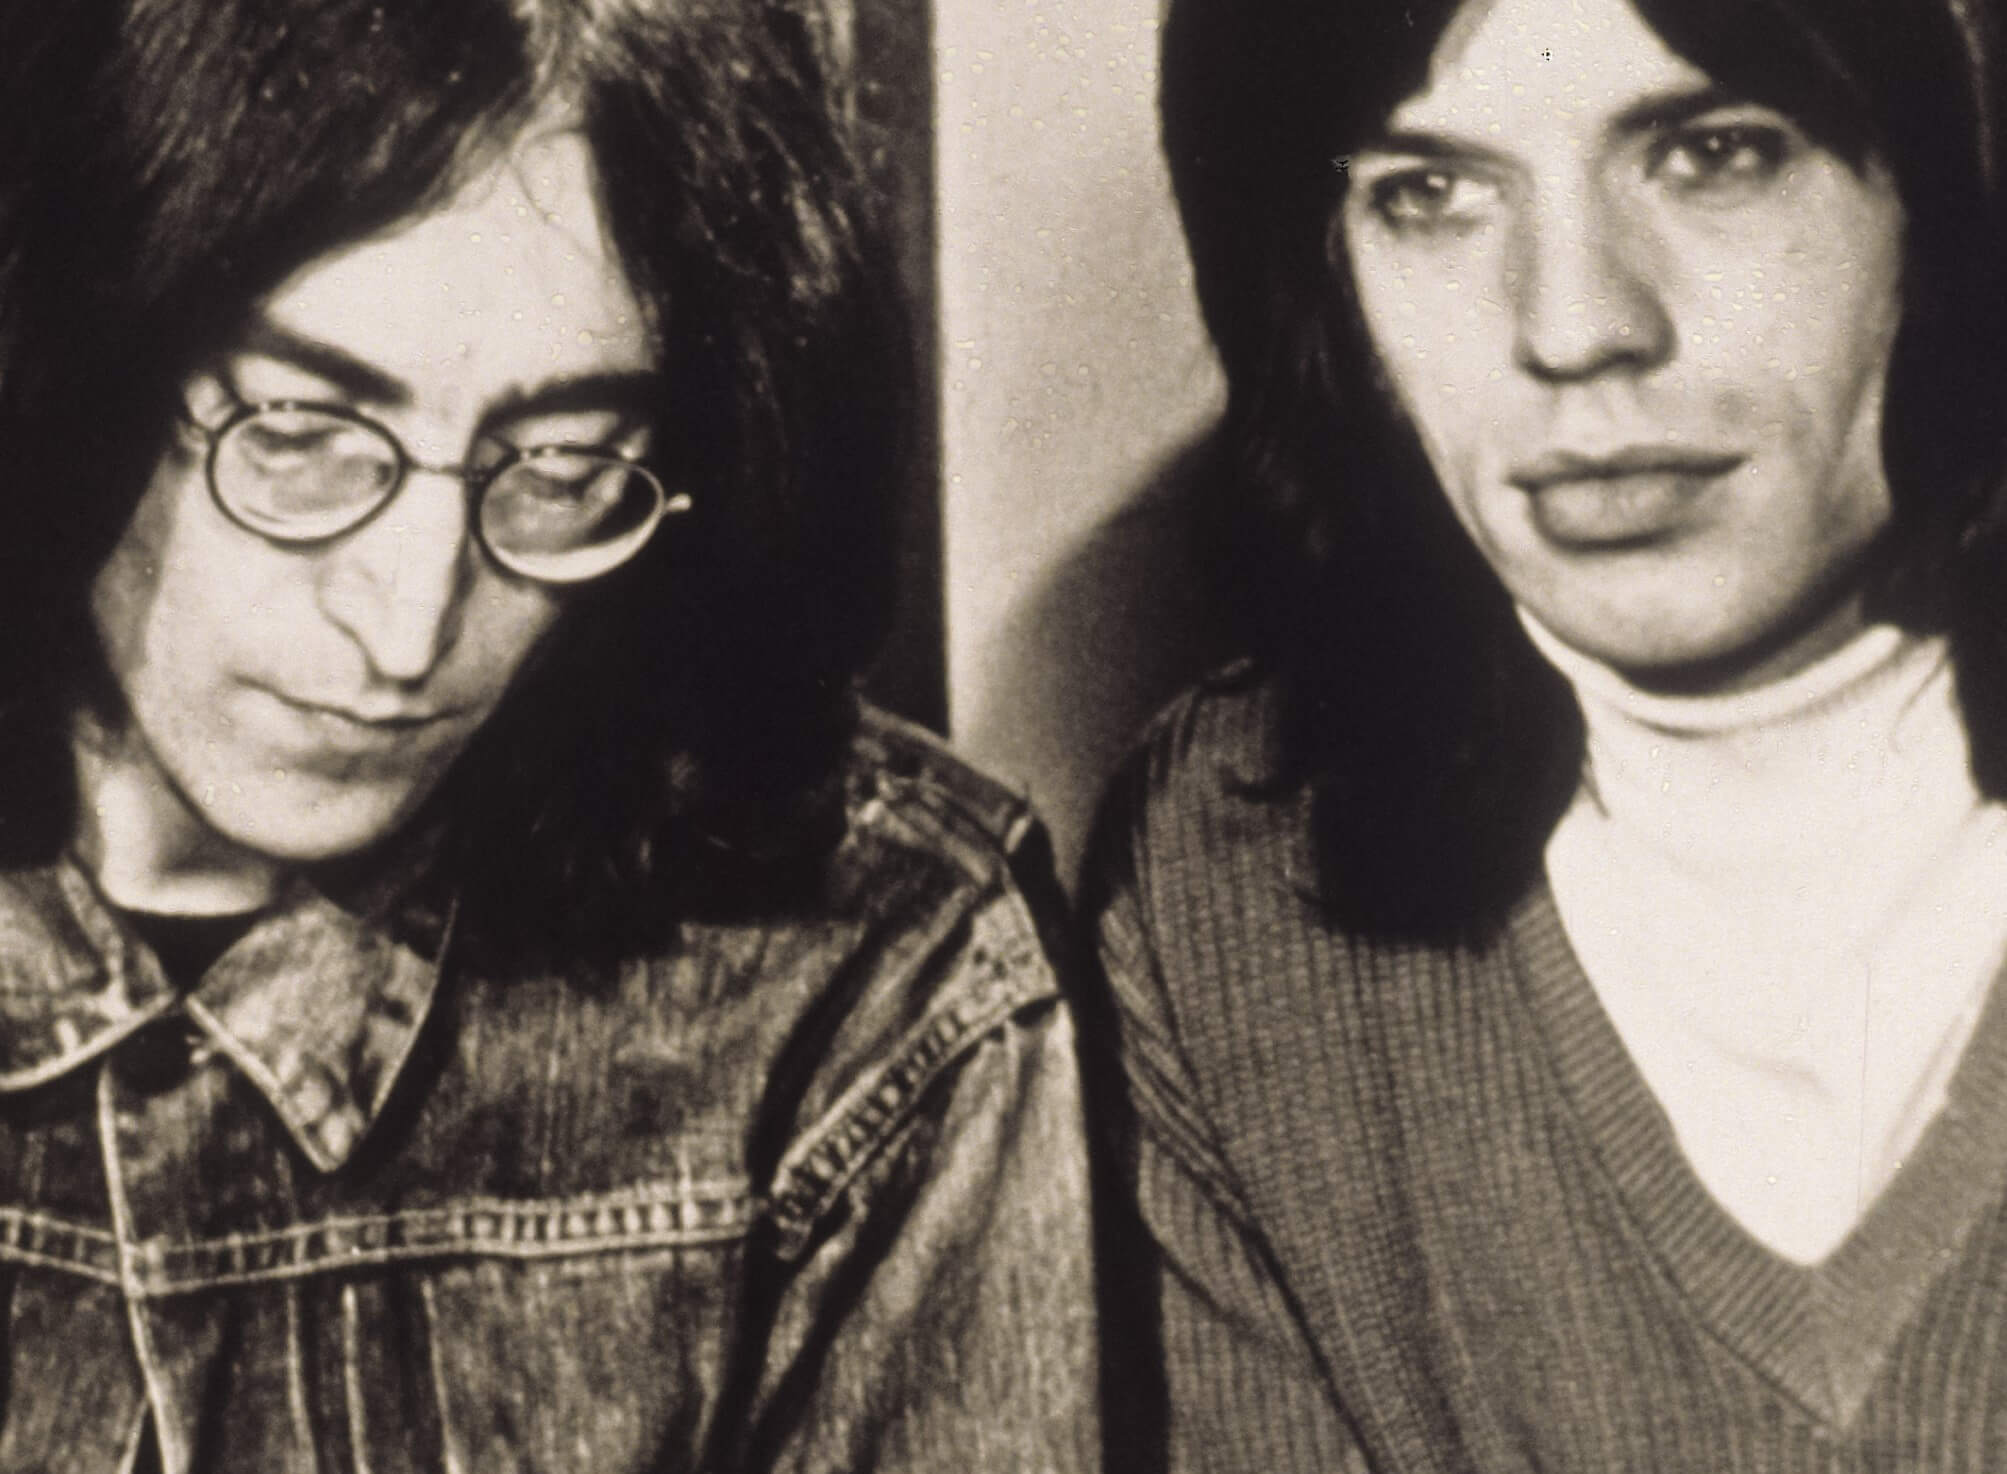 The Beatles' John Lennon and The Rolling Stones' Mick Jagger in black-and-white